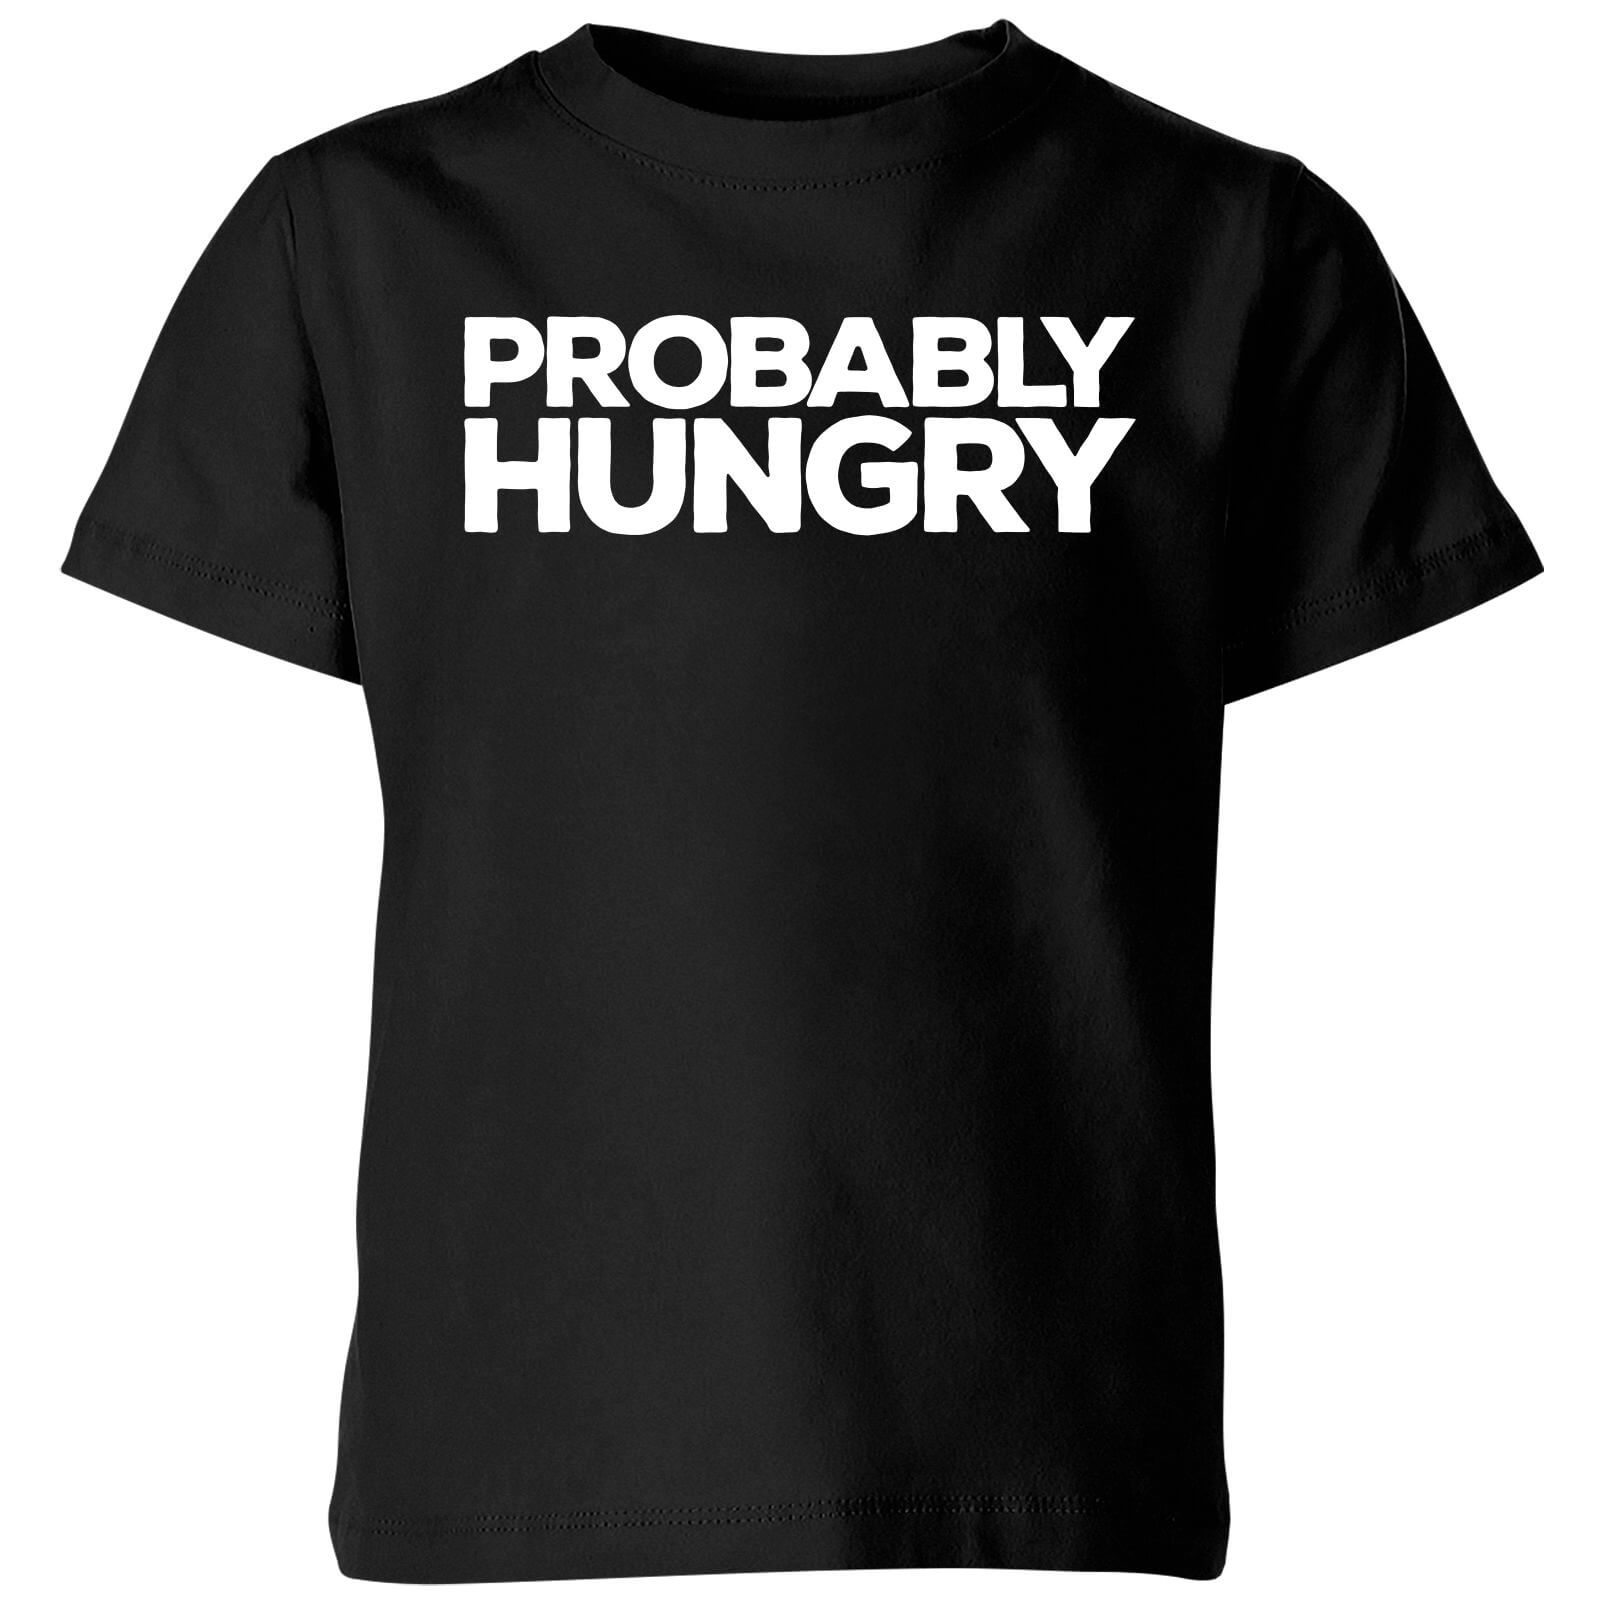 Own Brand Probably Hungry Kids T-Shirt - Black - 11-12 Years - Black